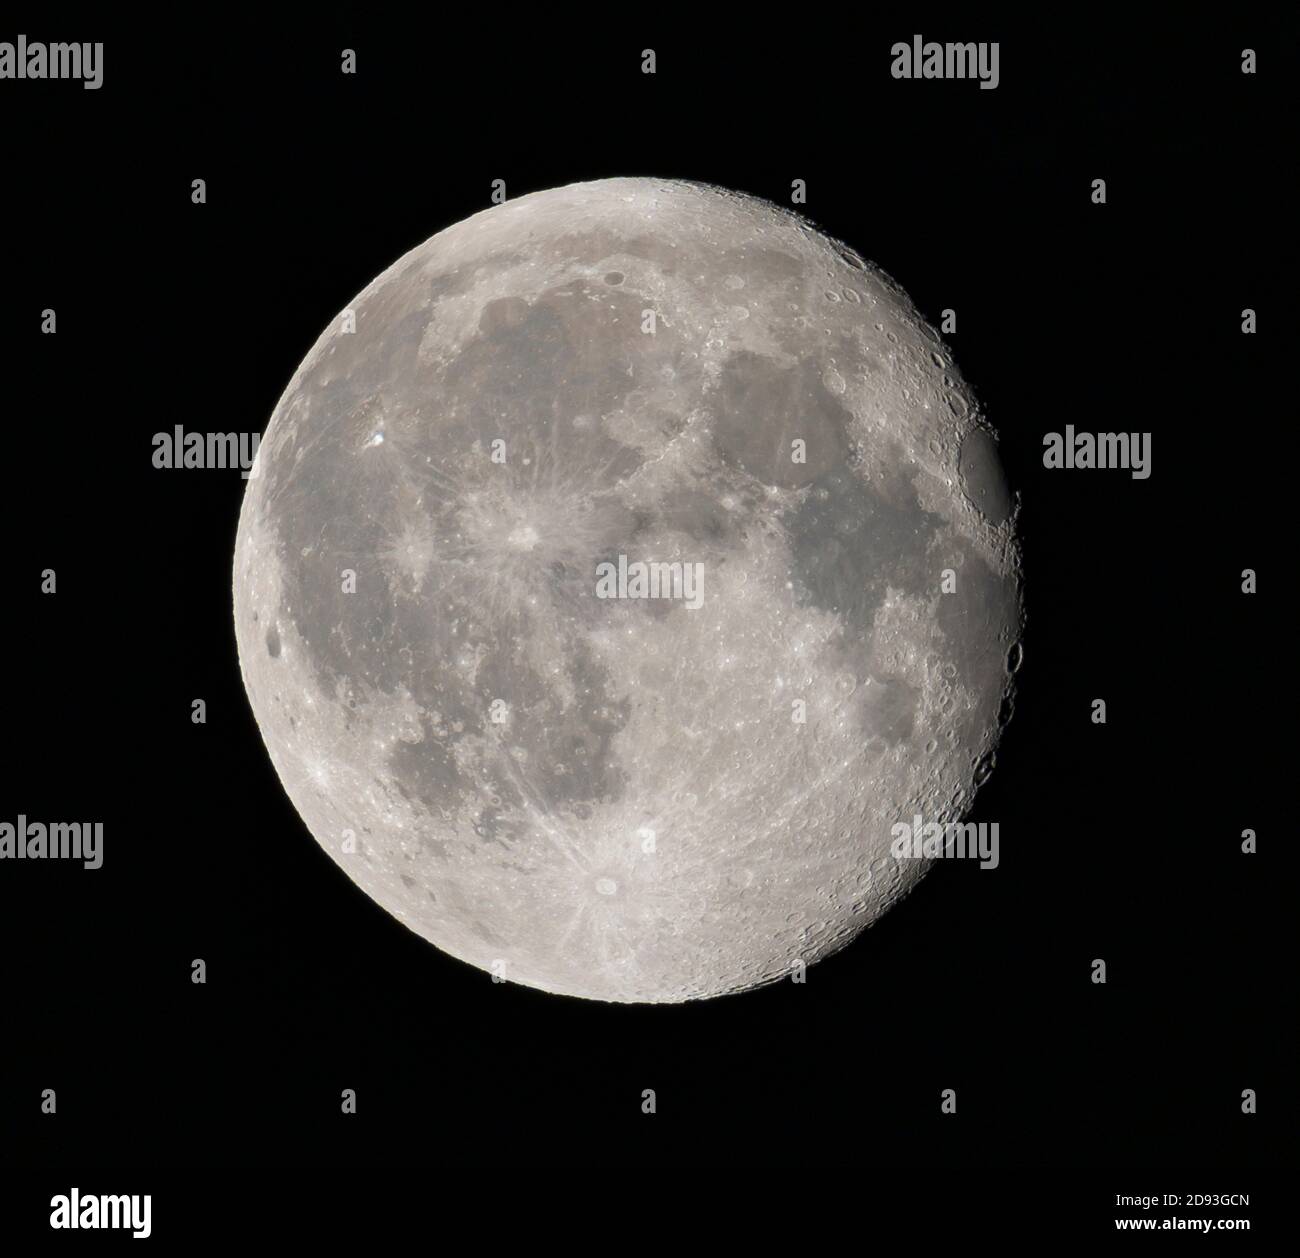 London, UK. 2 November 2020. 95.5% Waning Gibbous Moon in clear overnight sky. Credit: Malcolm Park/Alamy Live News. Stock Photo